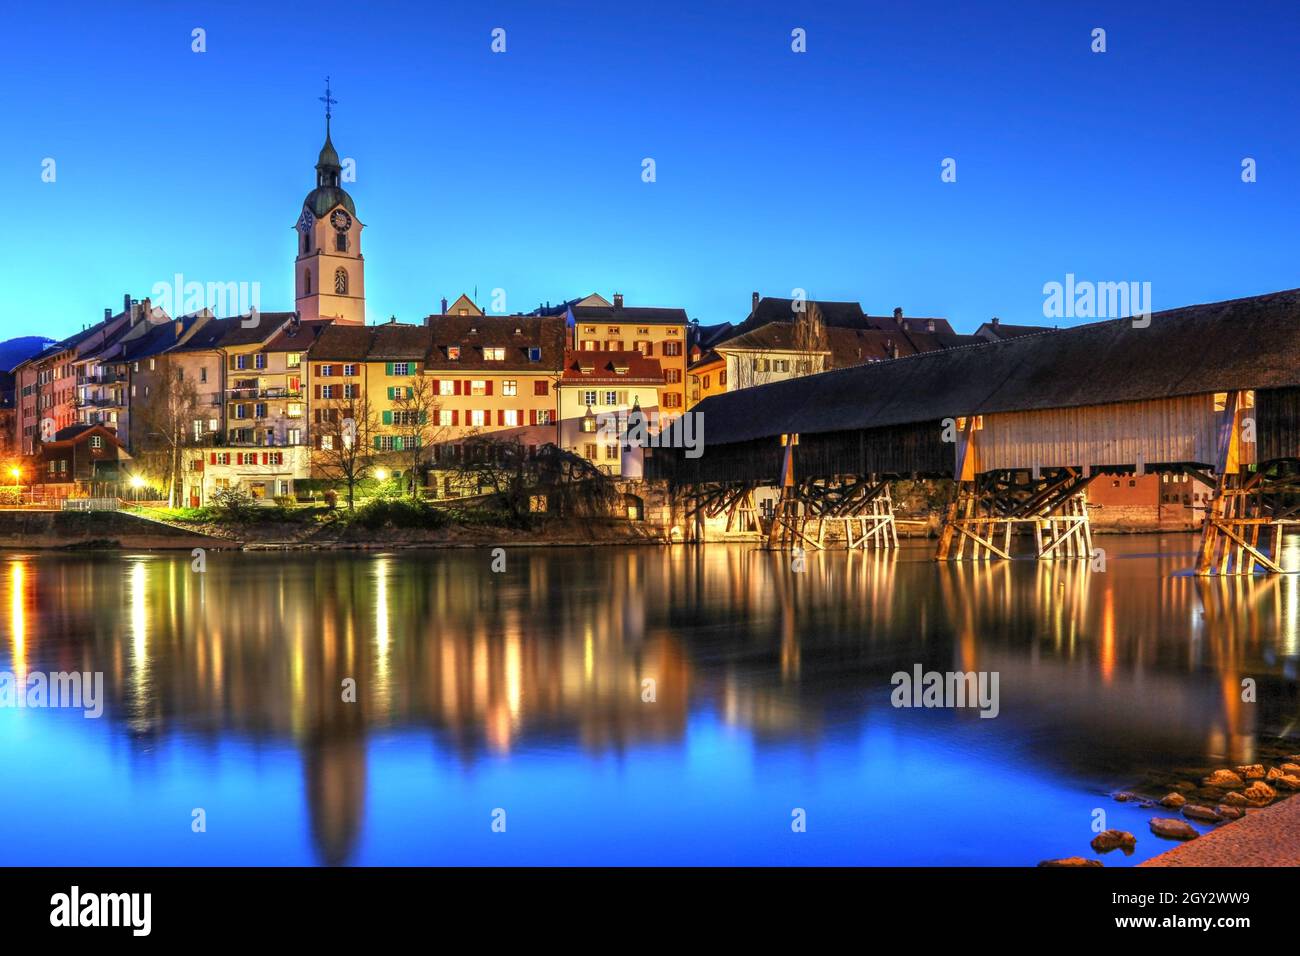 Nightscape of the old town of Olten with the famous wood covered bridge over the Aare river. Olten is a town in Solothurn Canton, Switzerland. Stock Photo